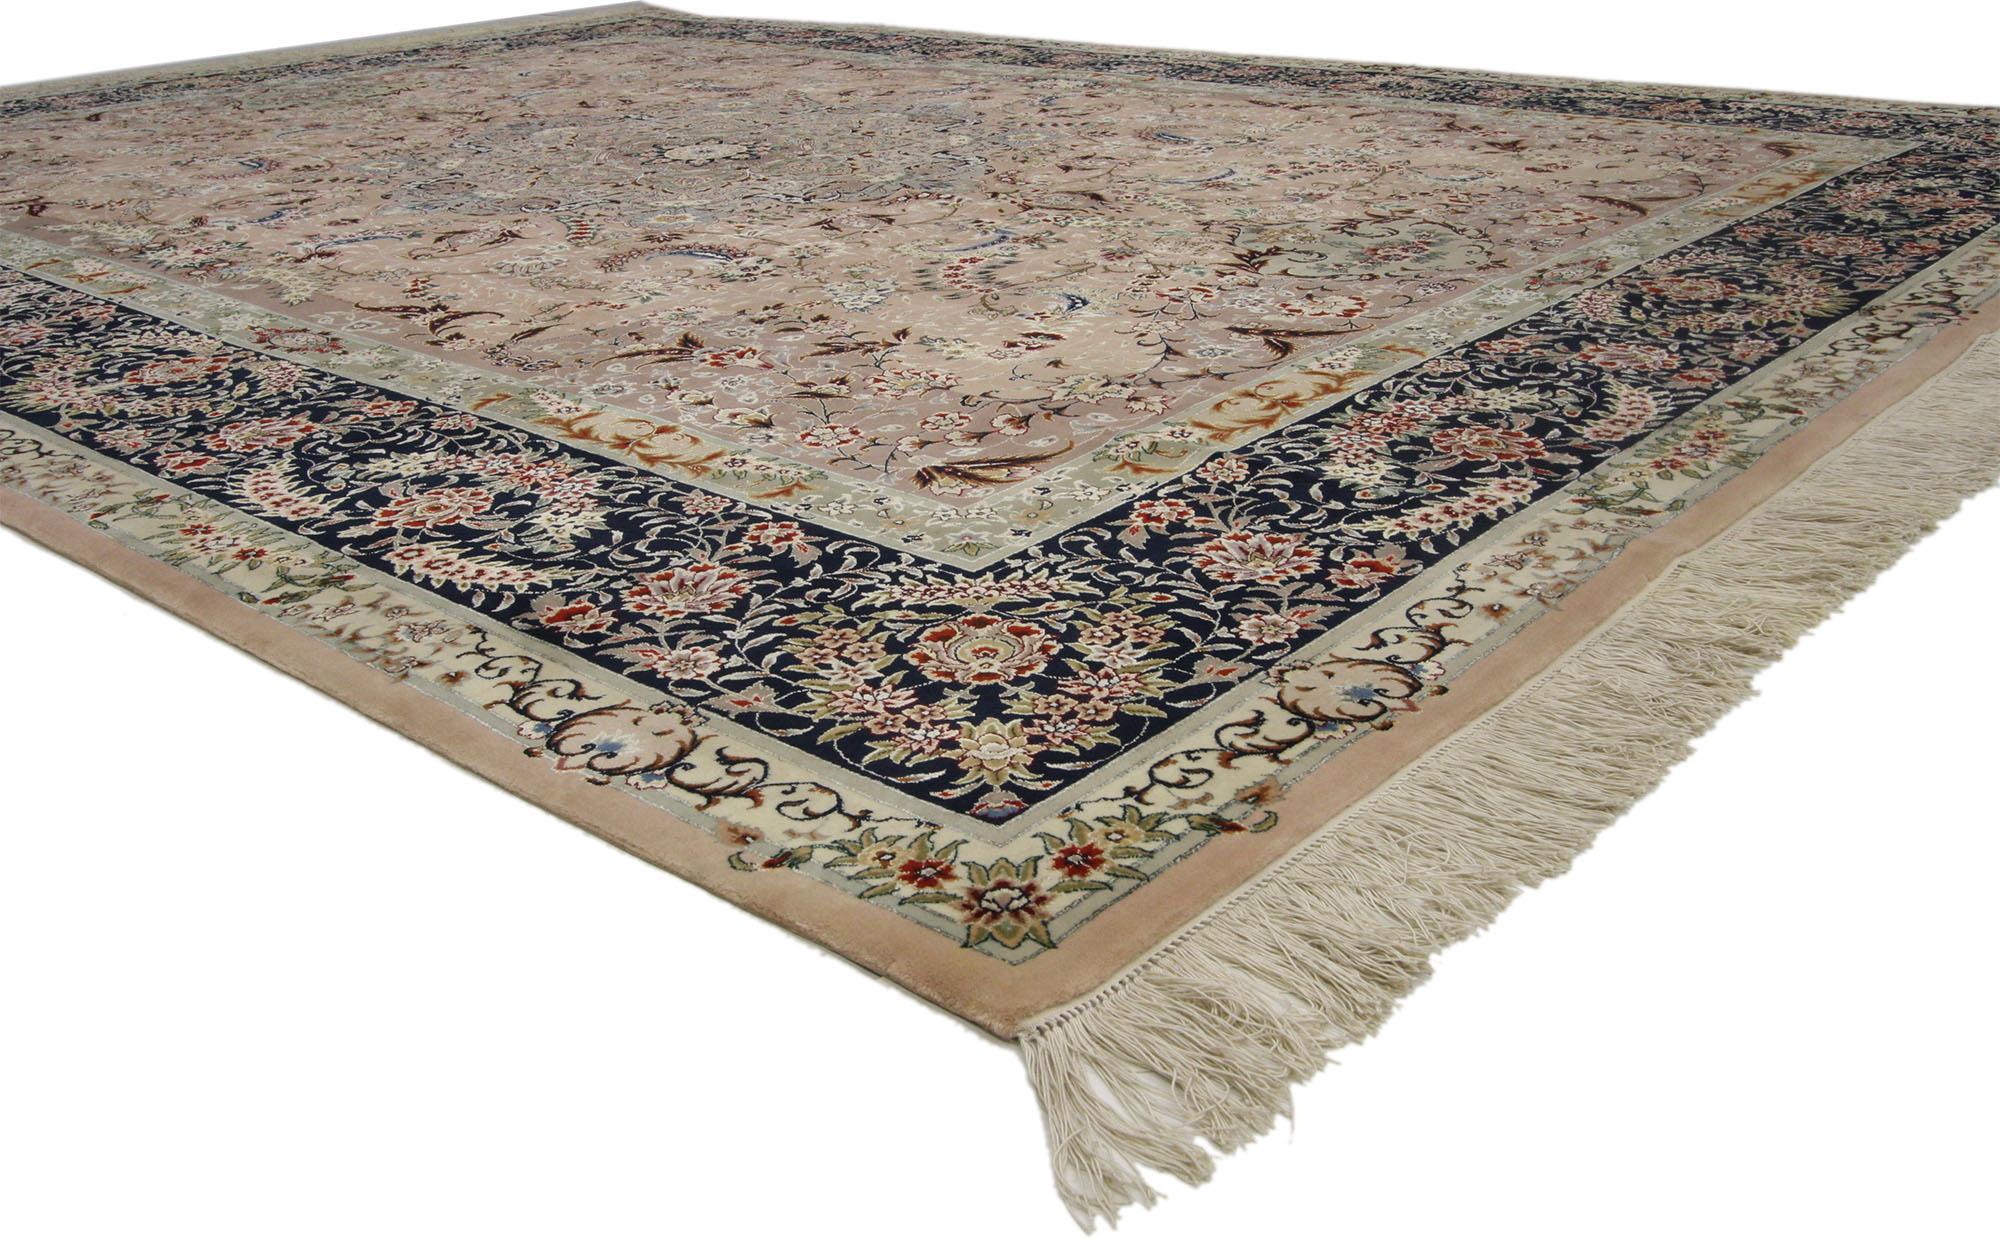 74838 Vintage Pale Pink Persian Tabriz rug with Romantic Arabesque Art Nouveau style 08'08 x 11'08. Here is a beautifully designed vintage pink Persian Tabriz rug with arabesque Art Nouveau style featuring gorgeous floral and vine scroll detail work